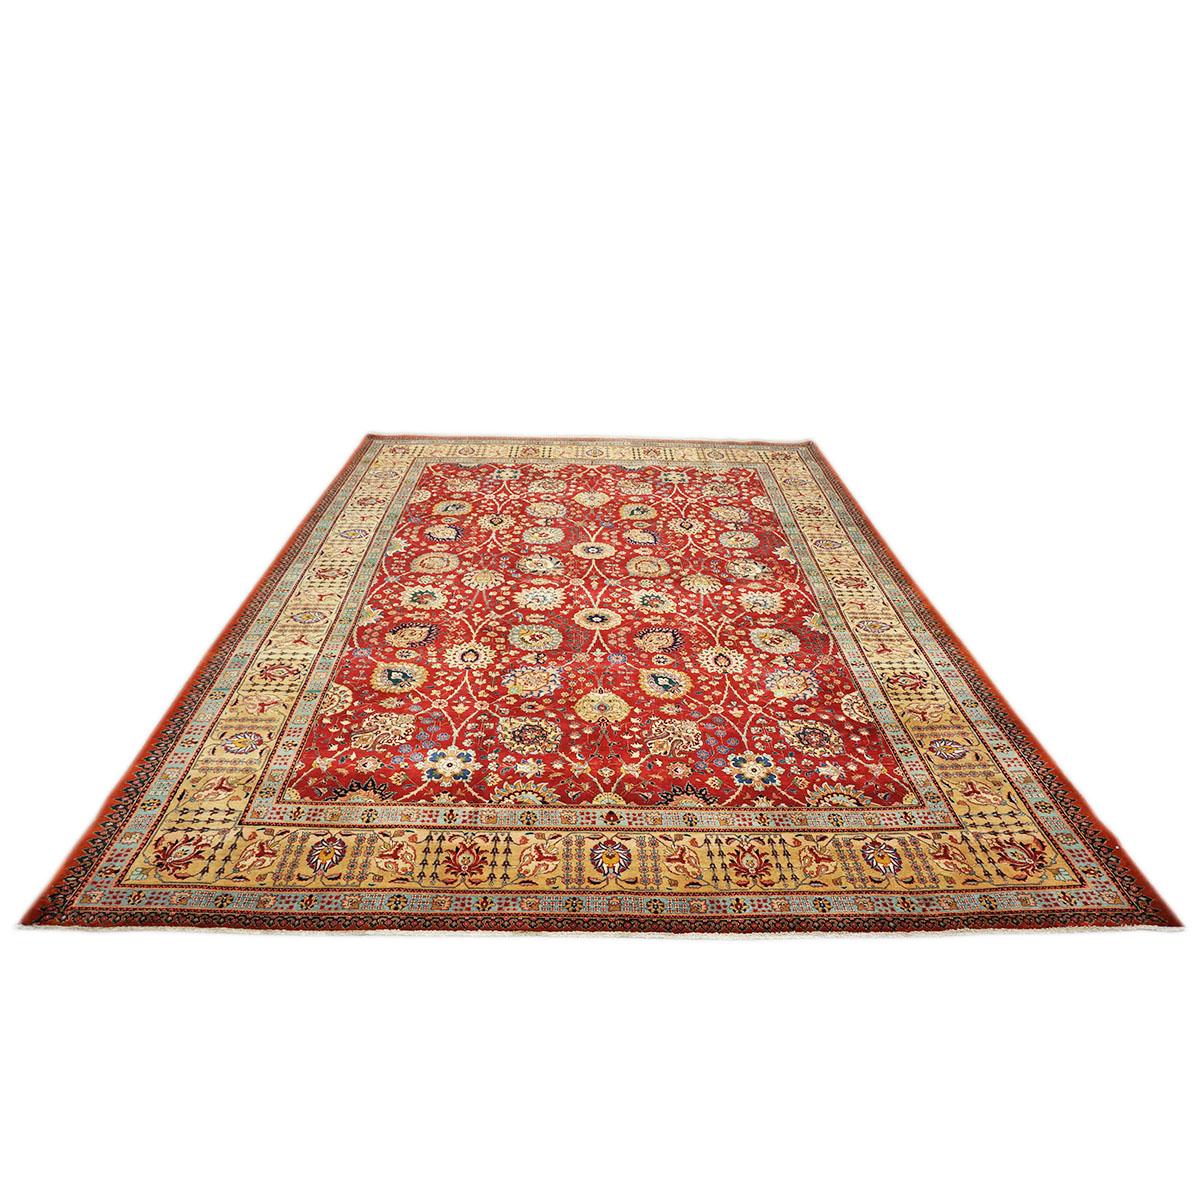 Ashly Fine Rugs presents an Antique Persian Tabriz circa 1930, handwoven in Iran with handspun wools and vegetable dyes, vibrant red background with an ivory border and teal accents. These rugs are better known as the Pahlavi Dynasty rugs, they were